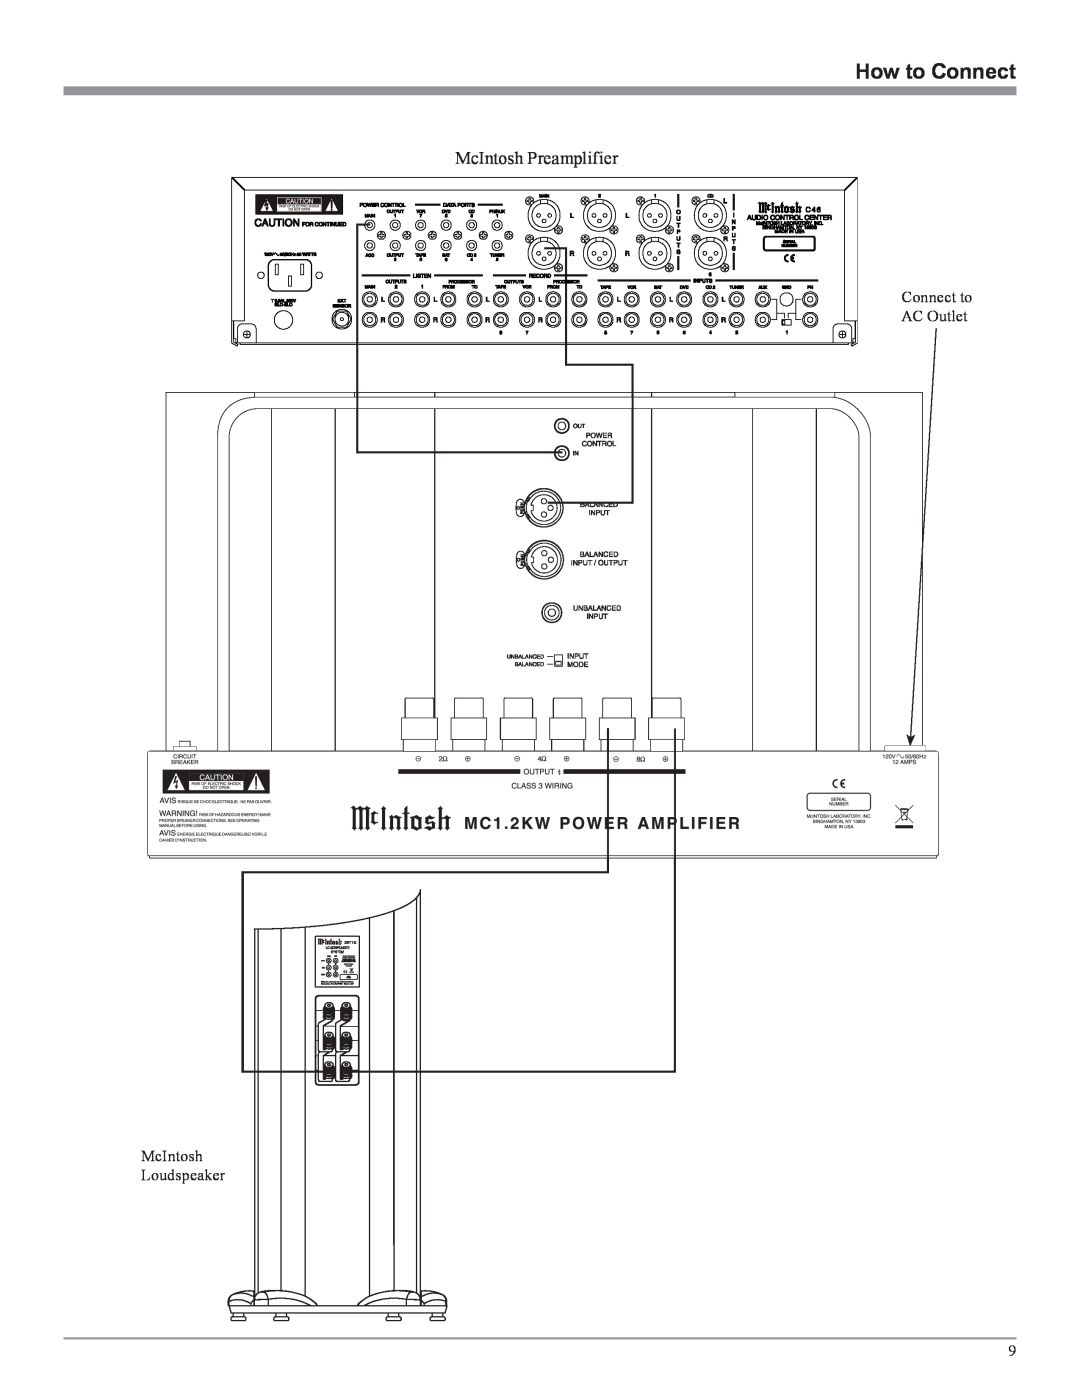 McIntosh MC1.2KW owner manual How to Connect, McIntosh Preamplifier, Connect to AC Outlet McIntosh Loudspeaker 